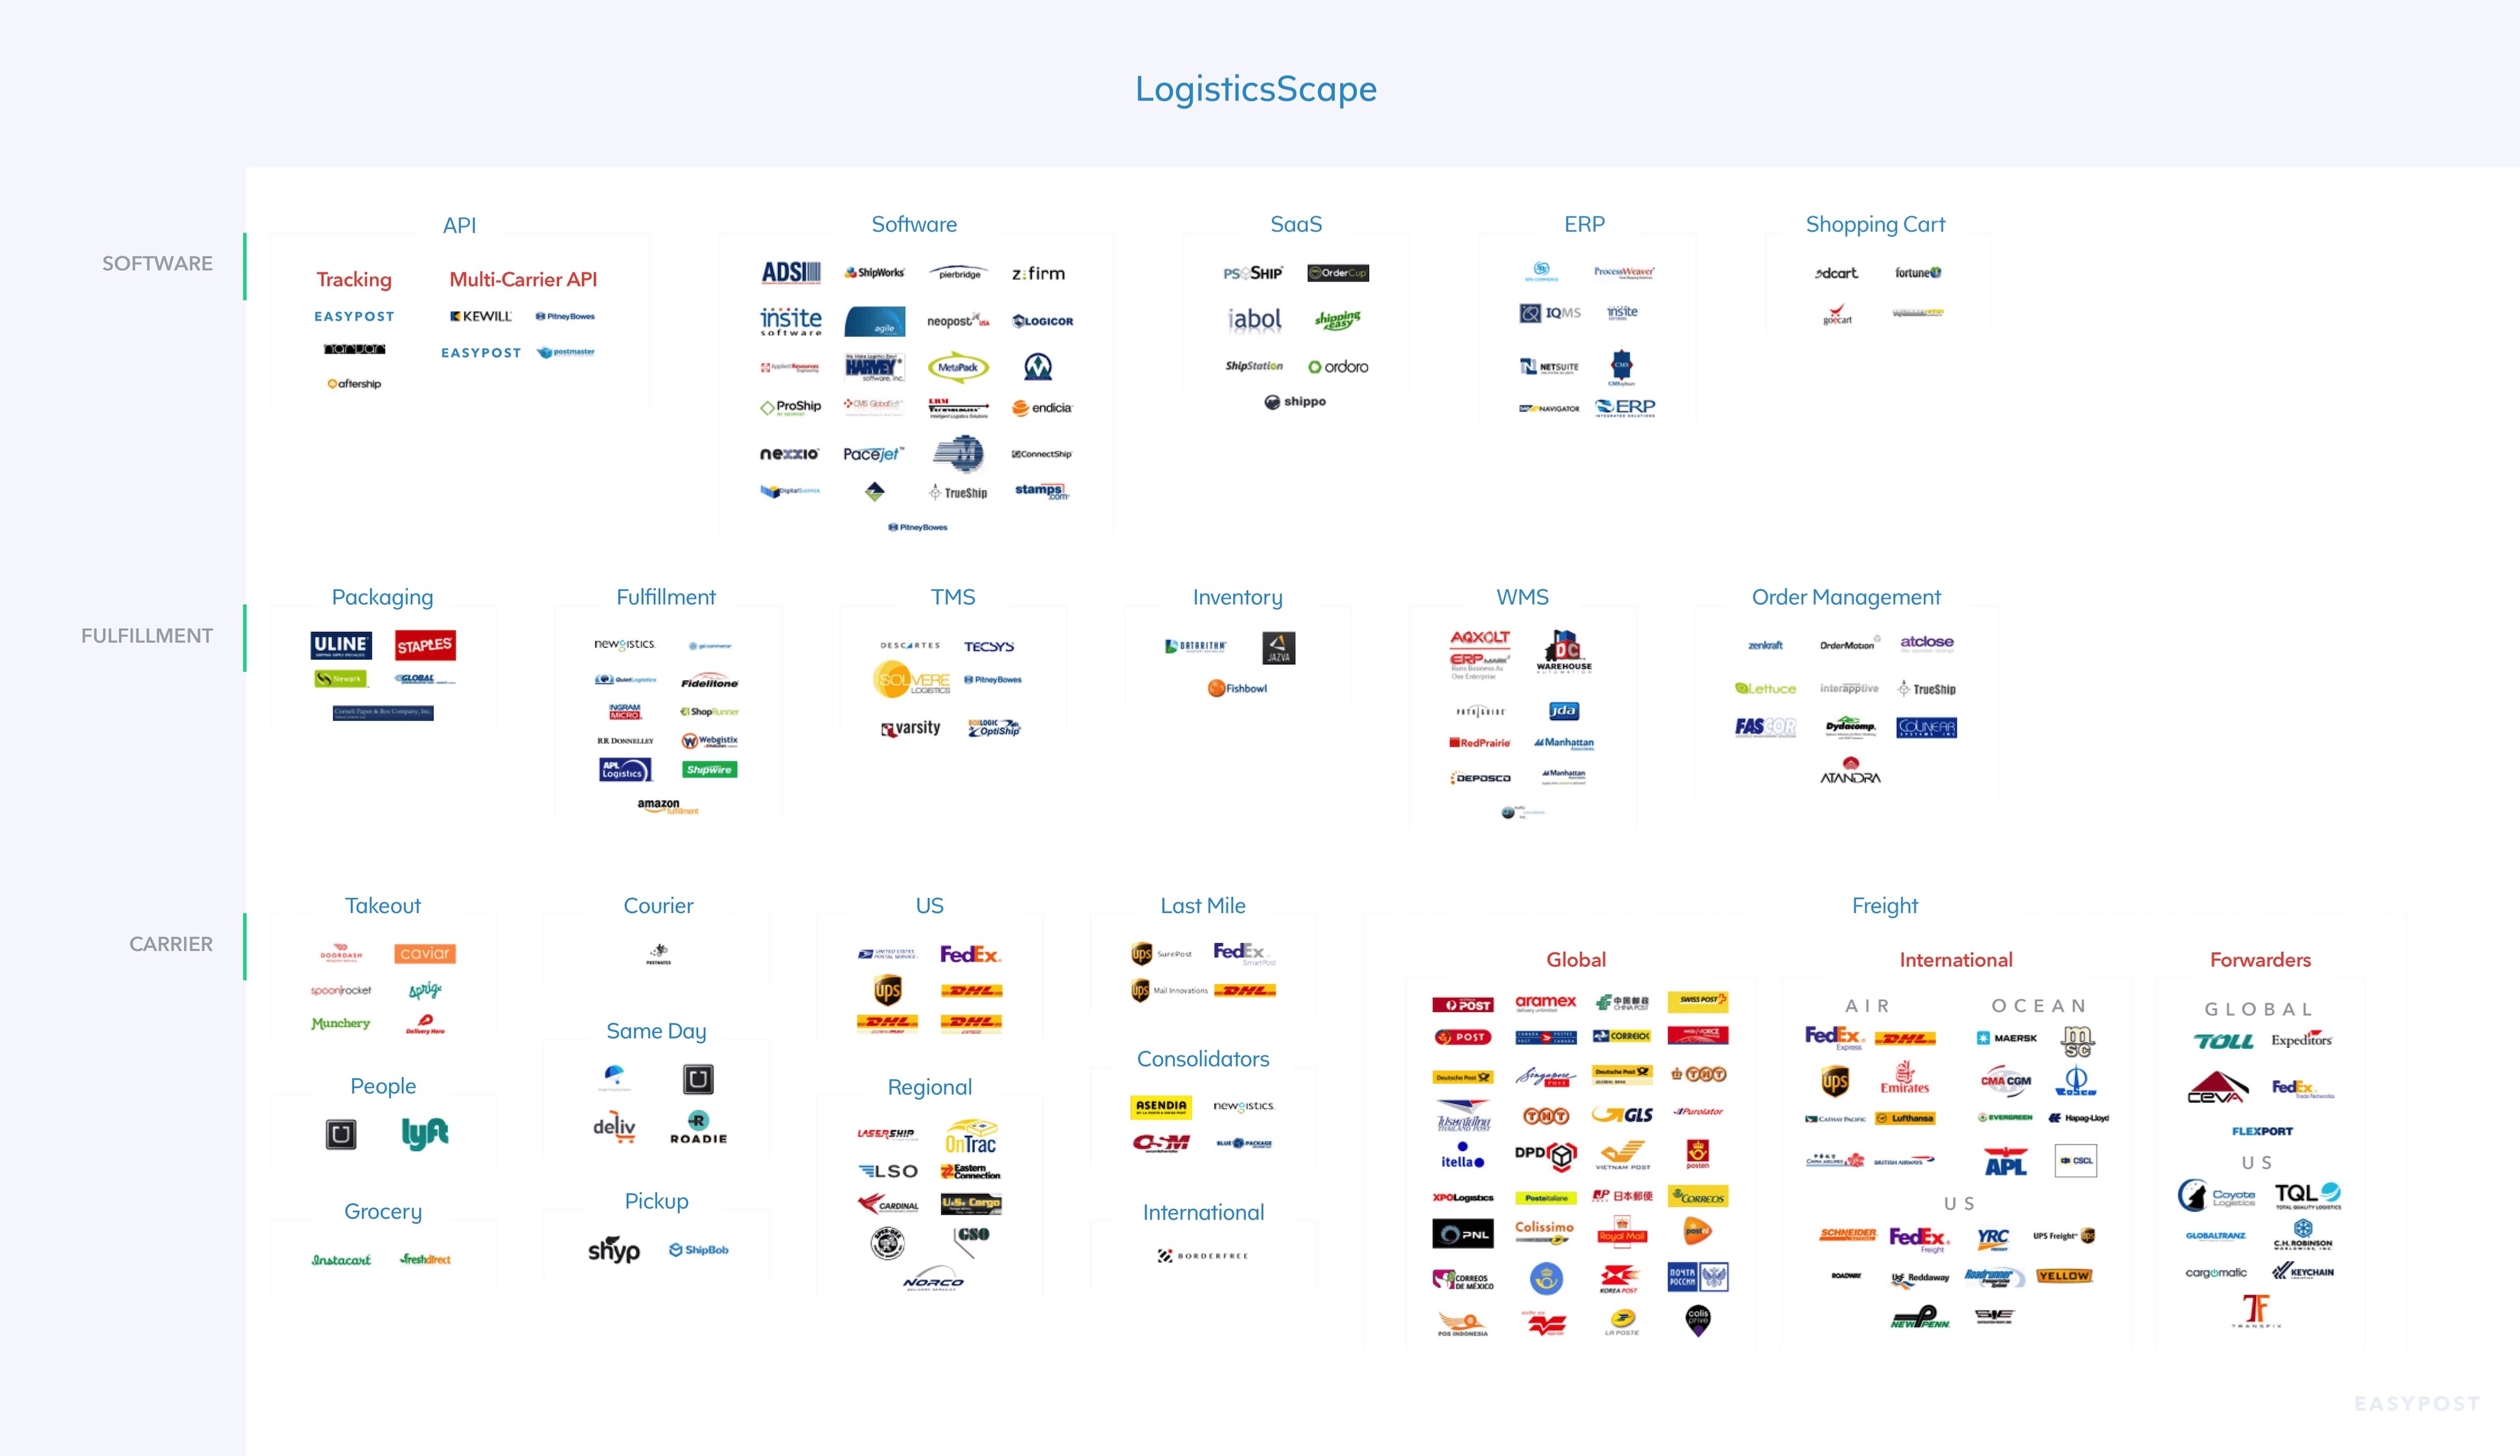 Grid of companies and logistics categories they fall into